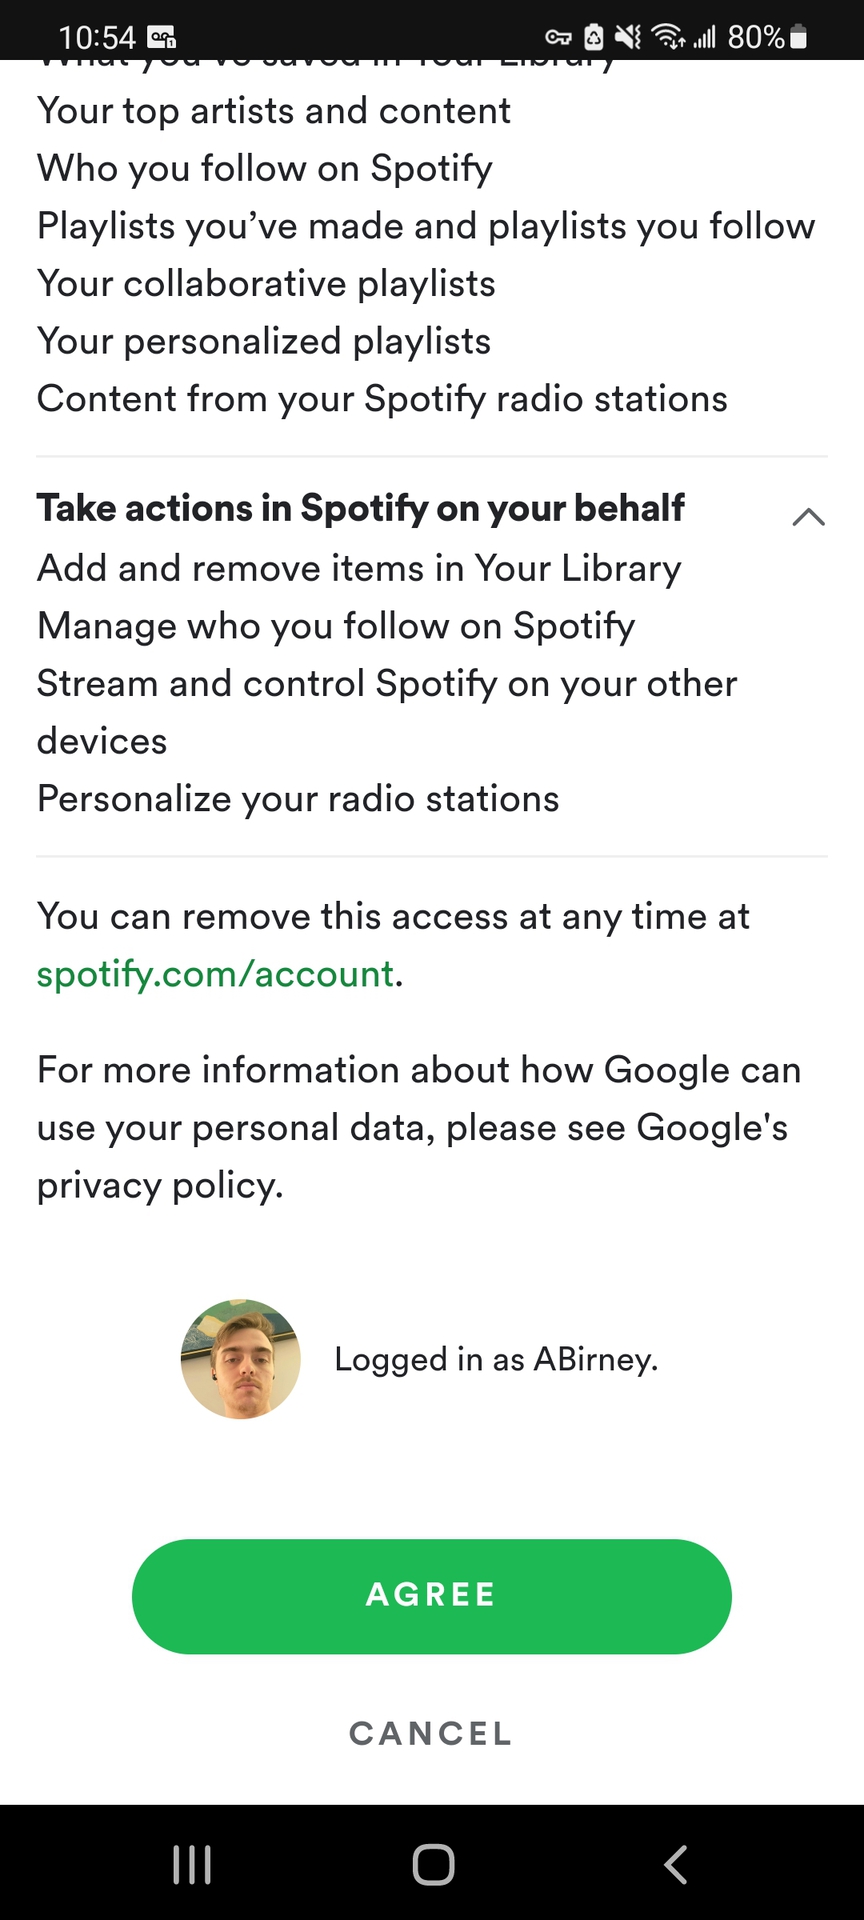 Spotify Google Home Agree button